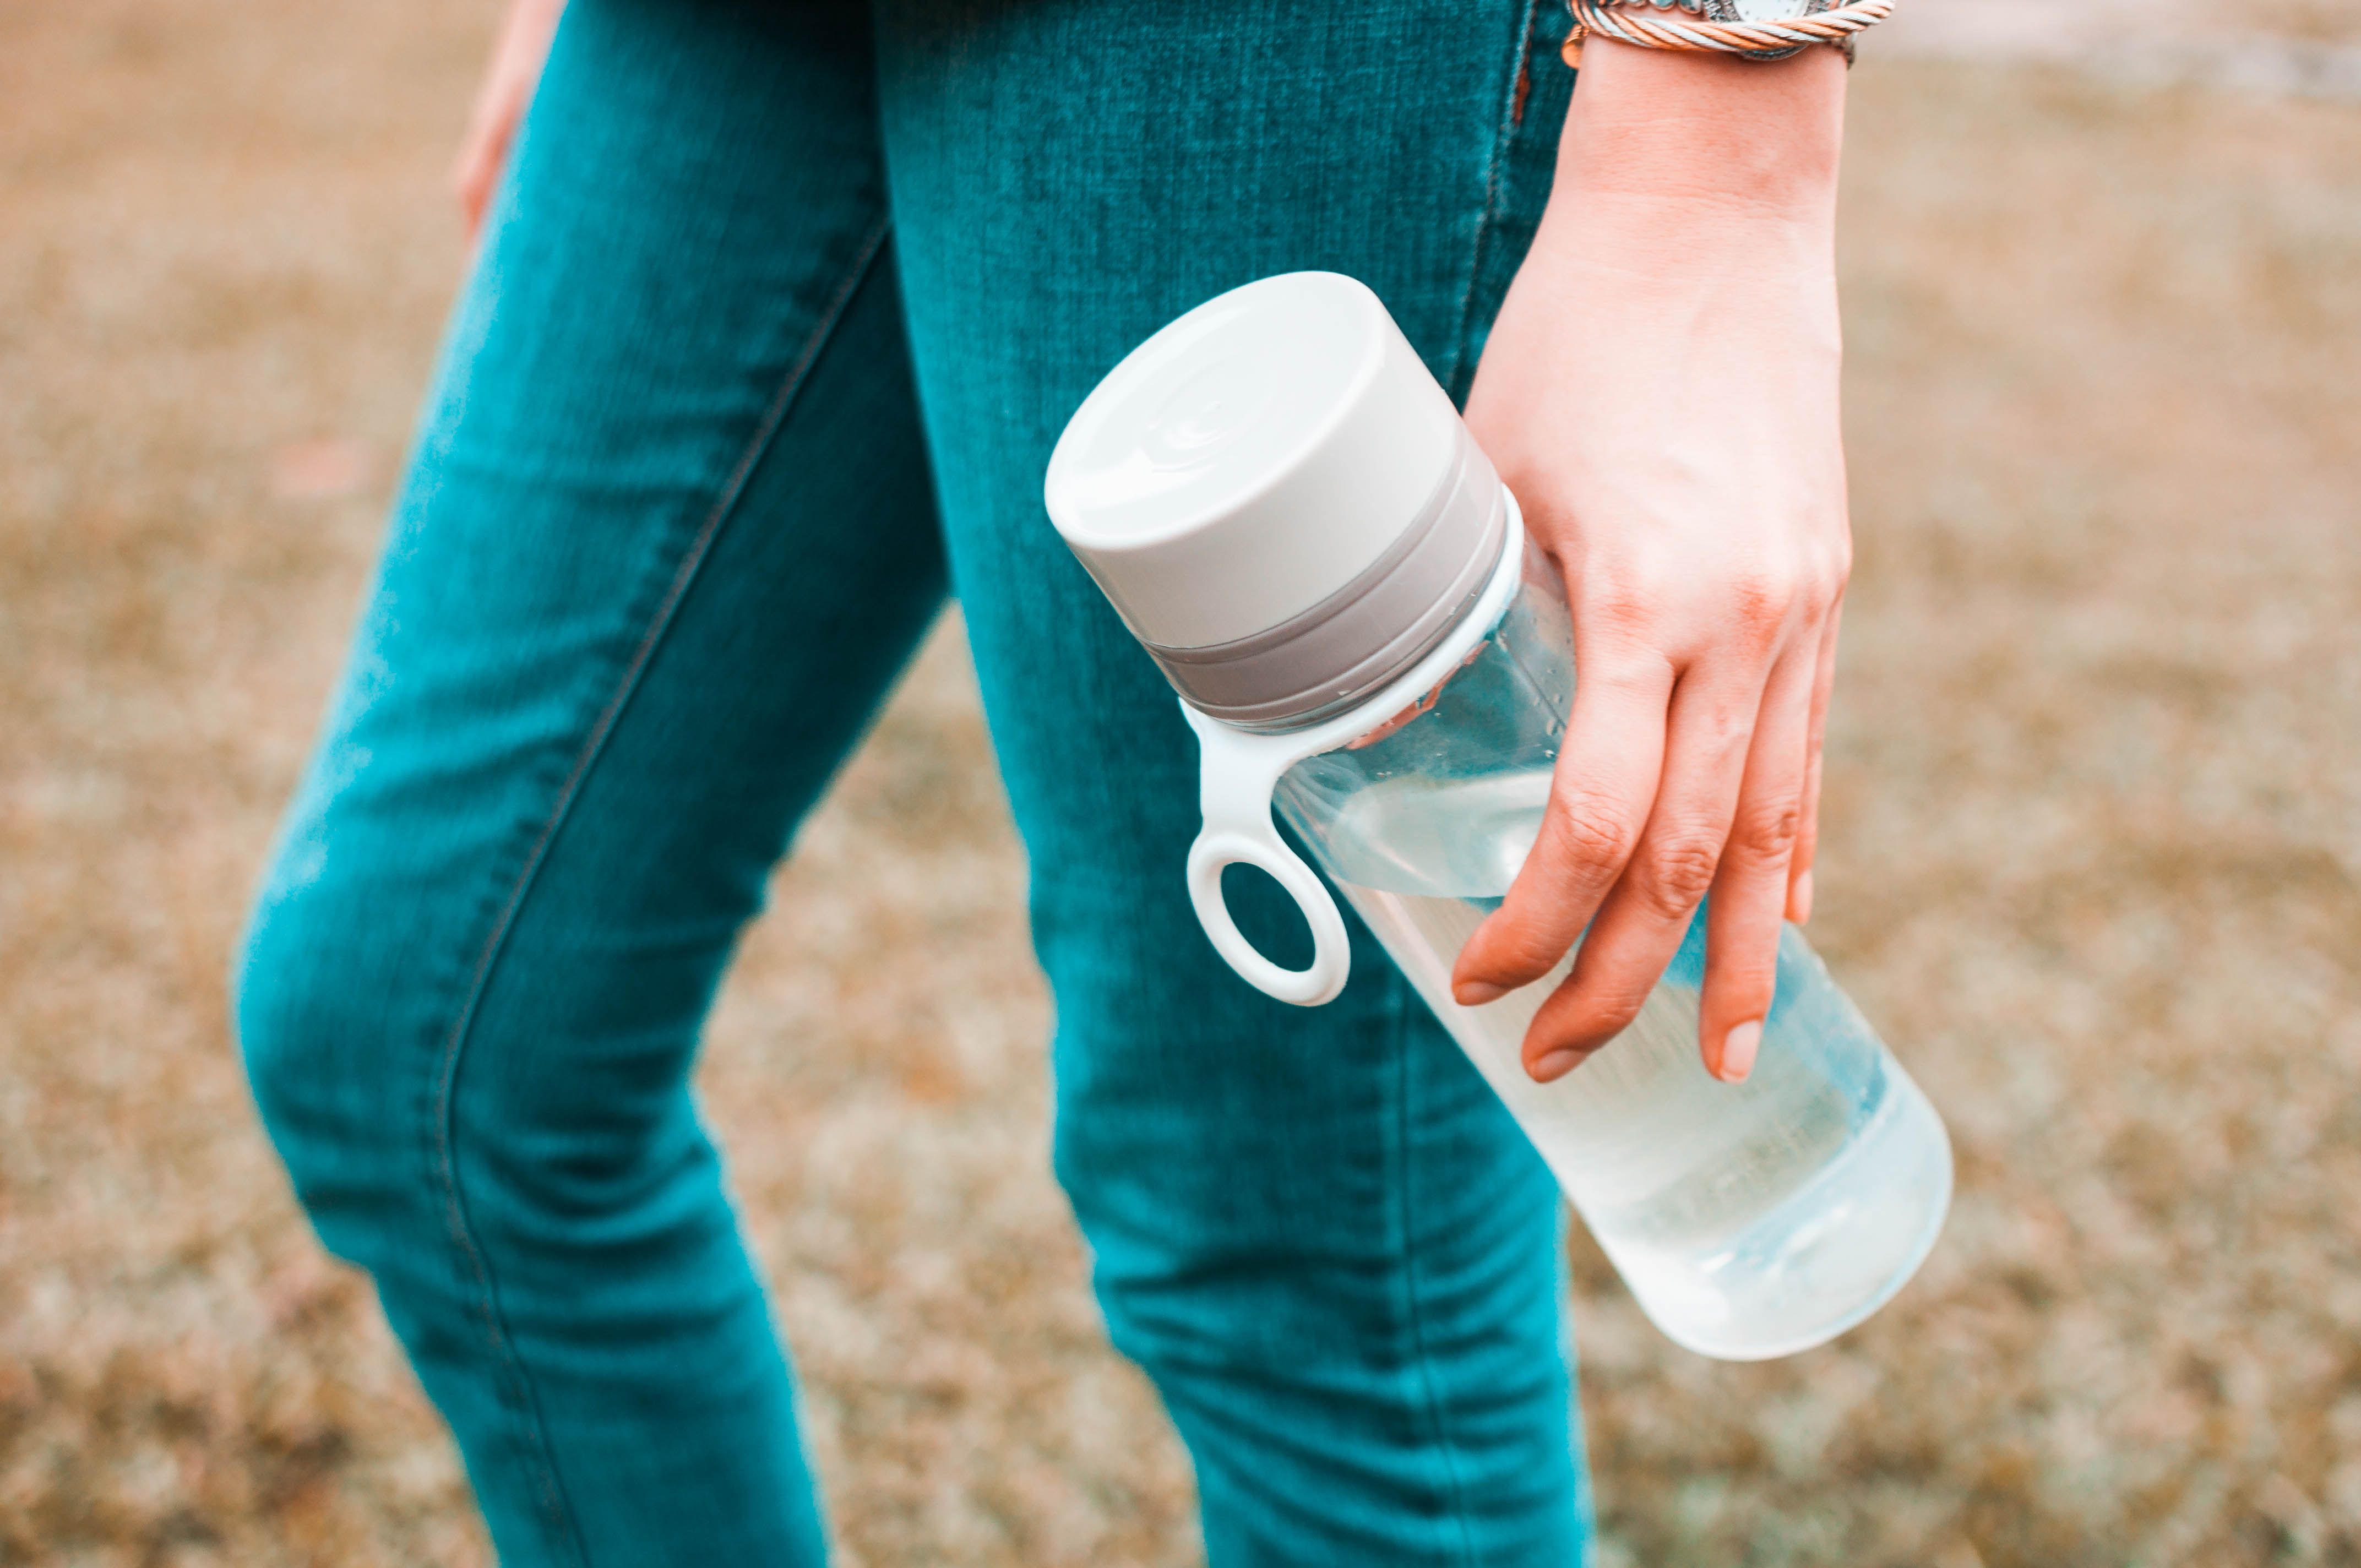 https://hips.hearstapps.com/hmg-prod/images/young-woman-is-holding-a-reusable-water-bottle-royalty-free-image-1703186804.jpg